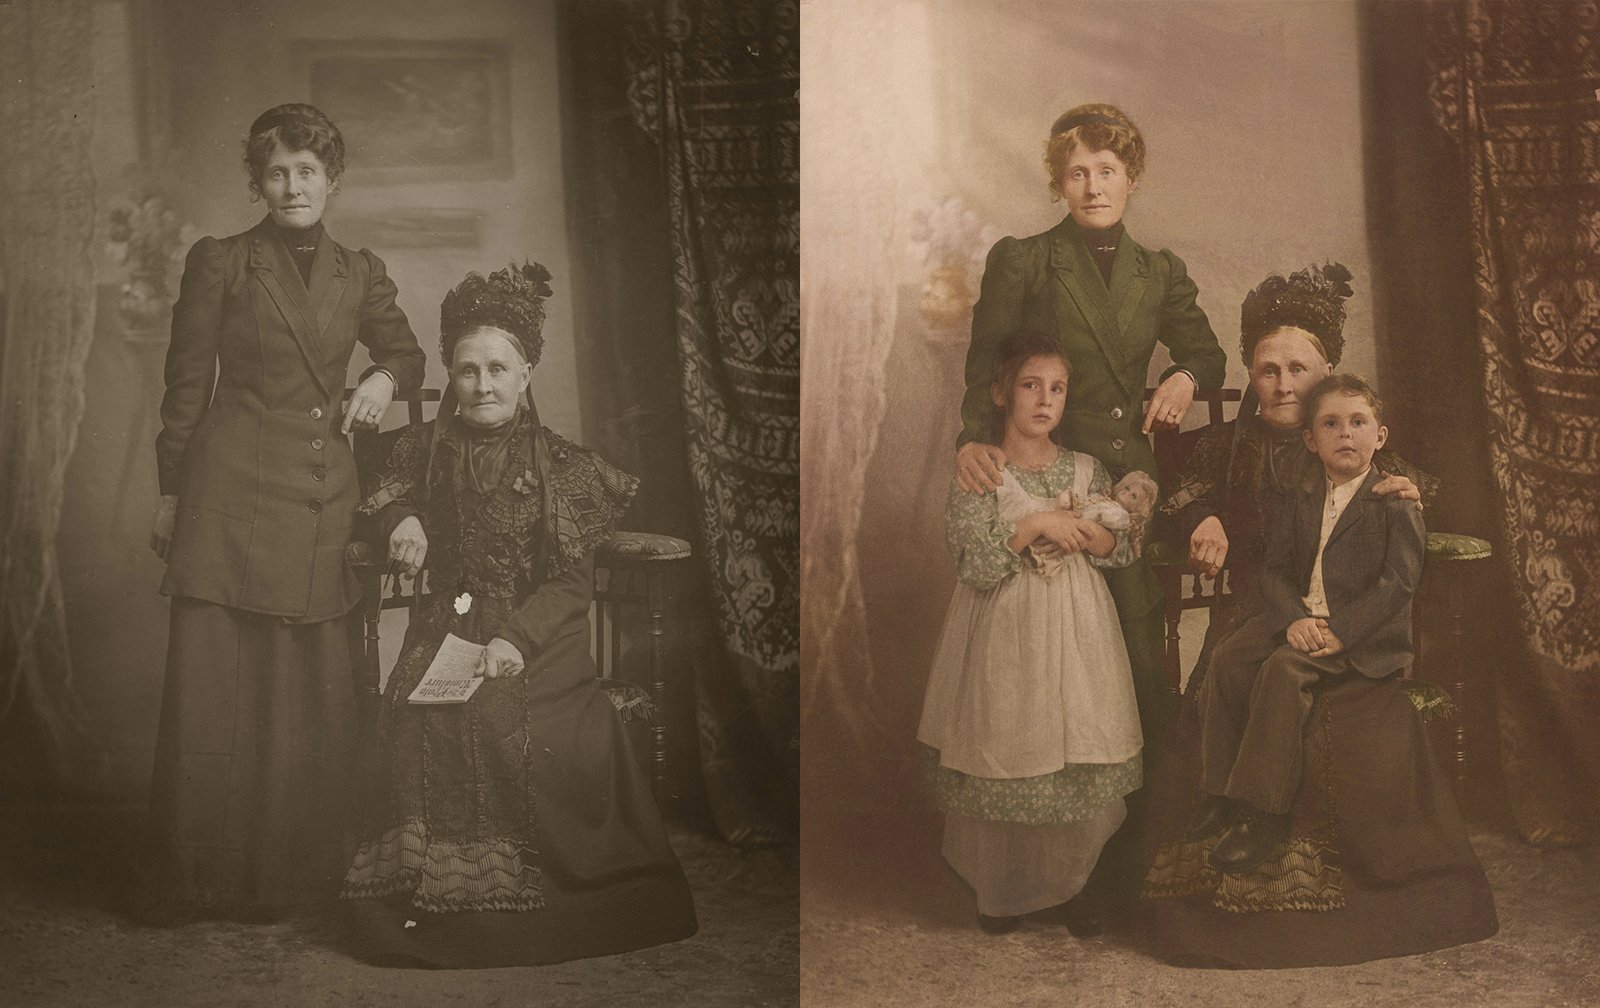 Photog Cleverly Photoshops Kids Into a Family Photo from Early 1900s